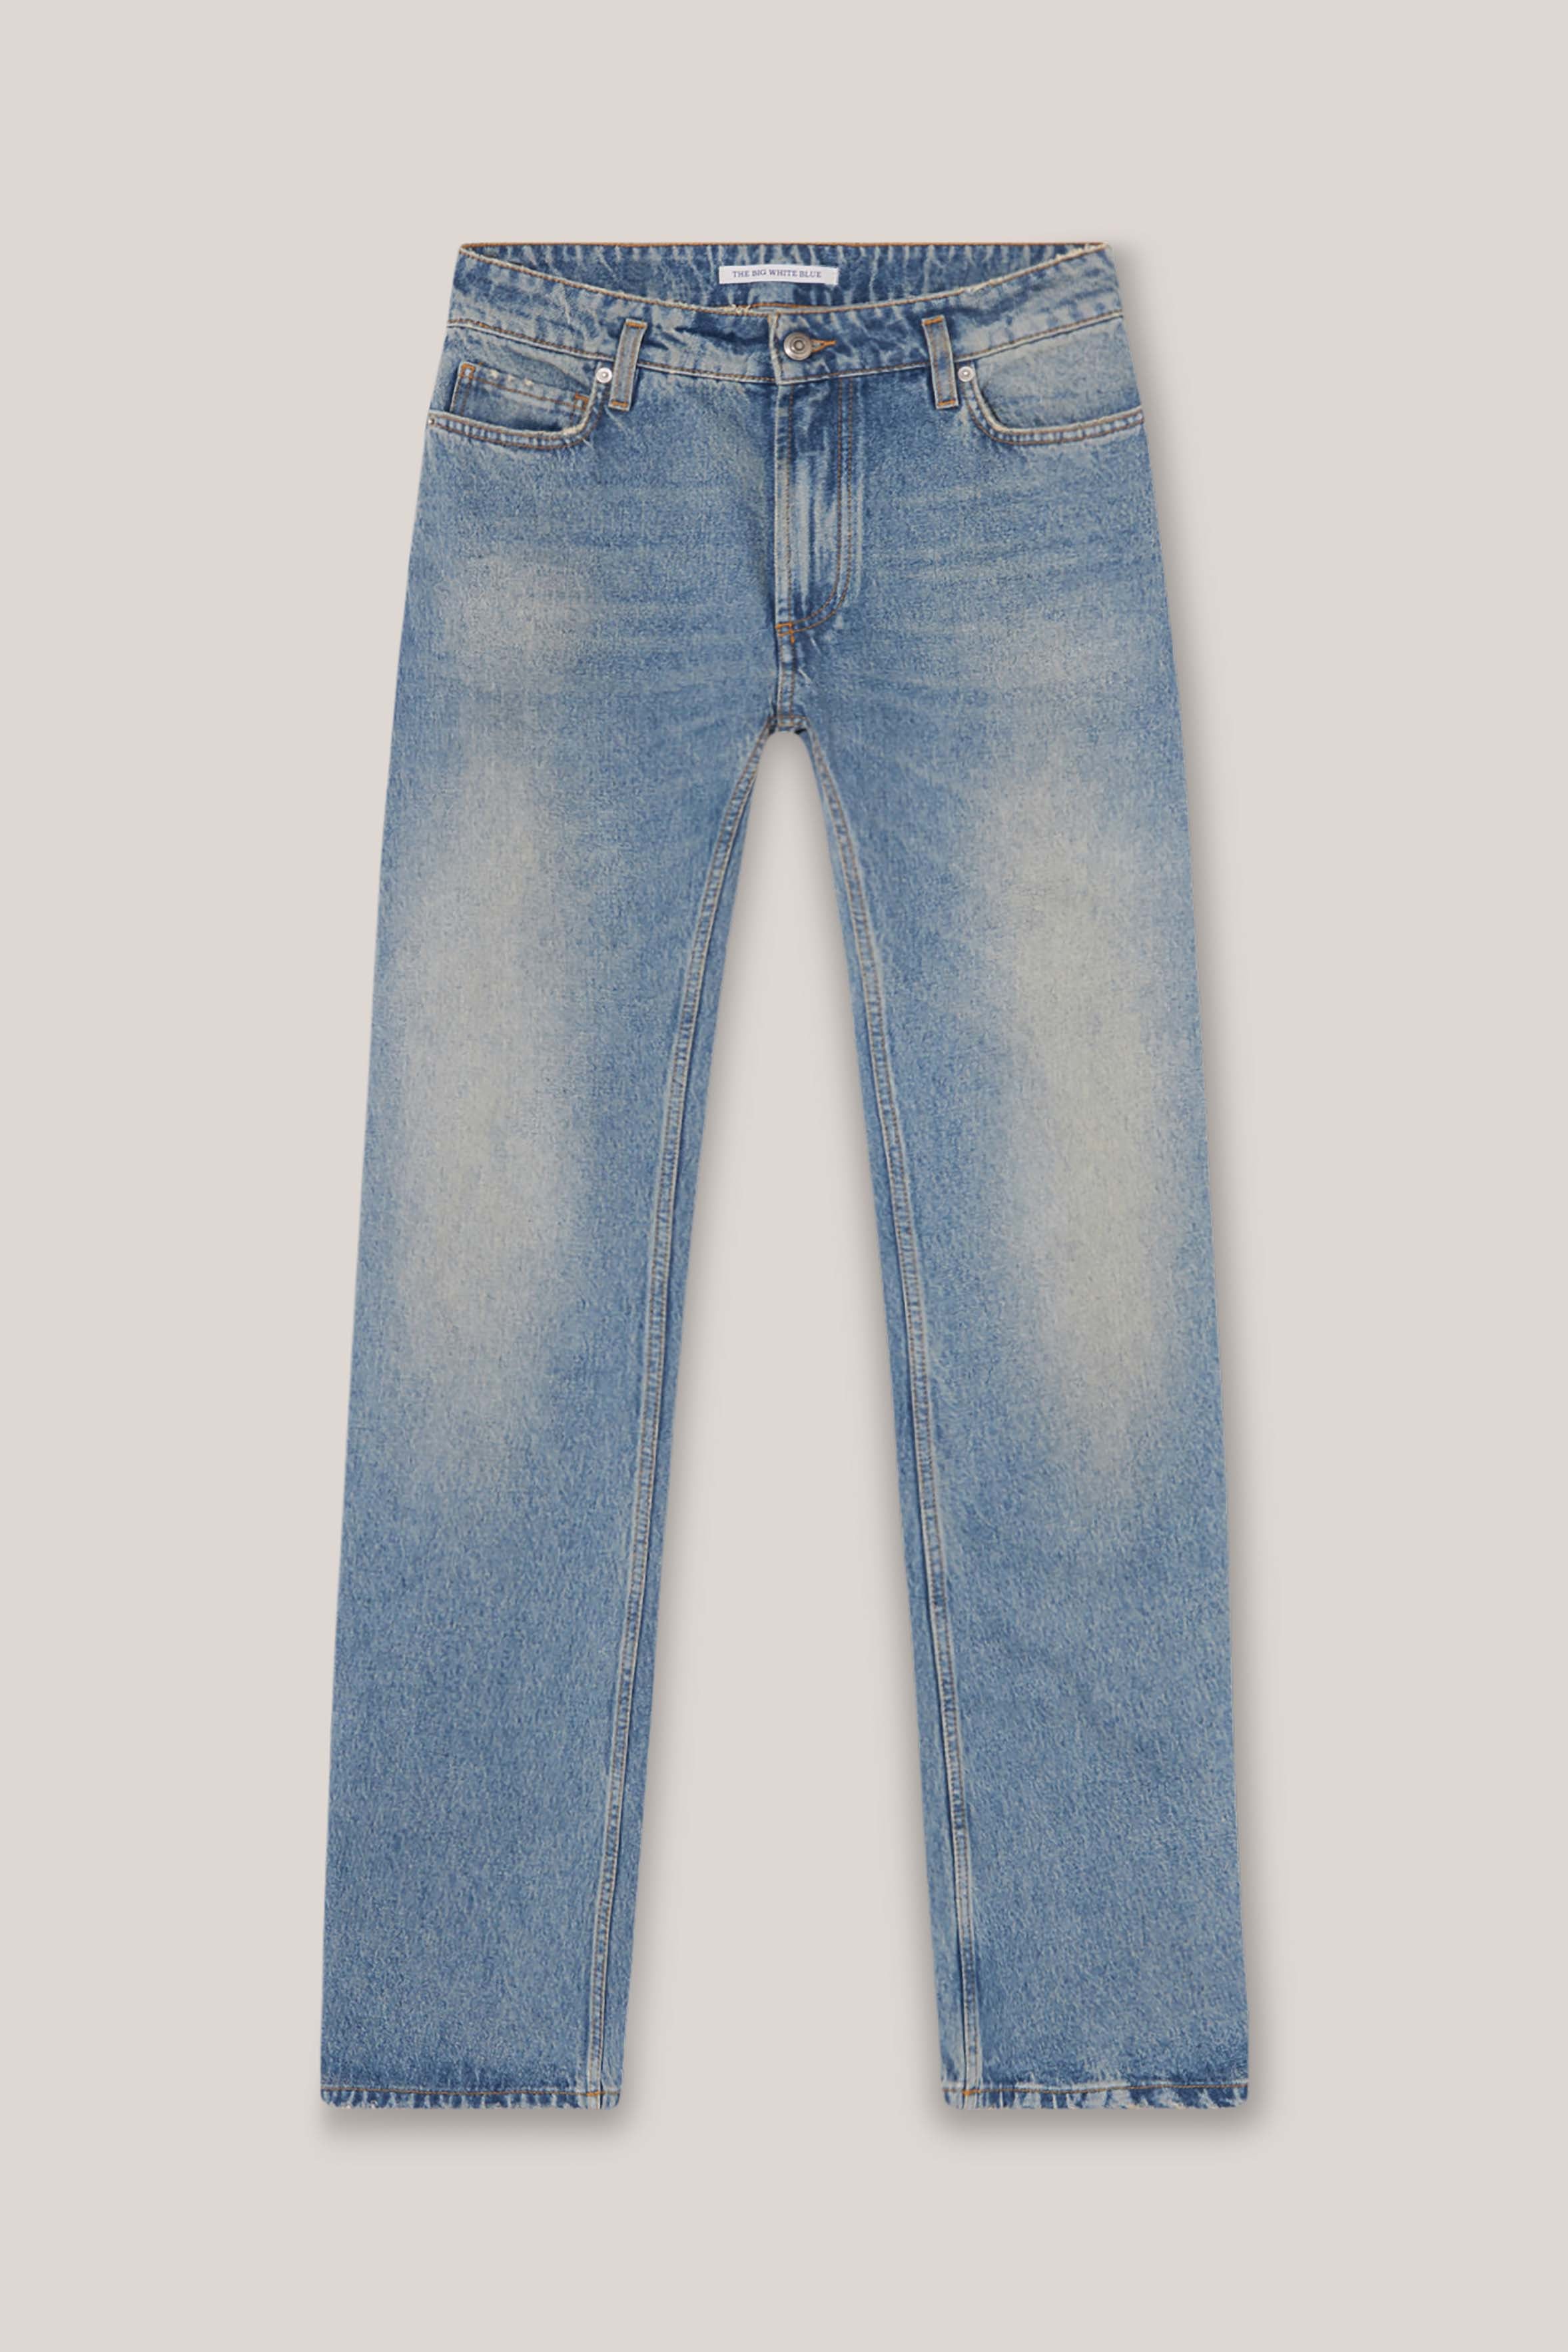 Shop Brunello Cucinelli Authentic Denim Baggy Jeans With Shiny Tab | Saks  Fifth Avenue